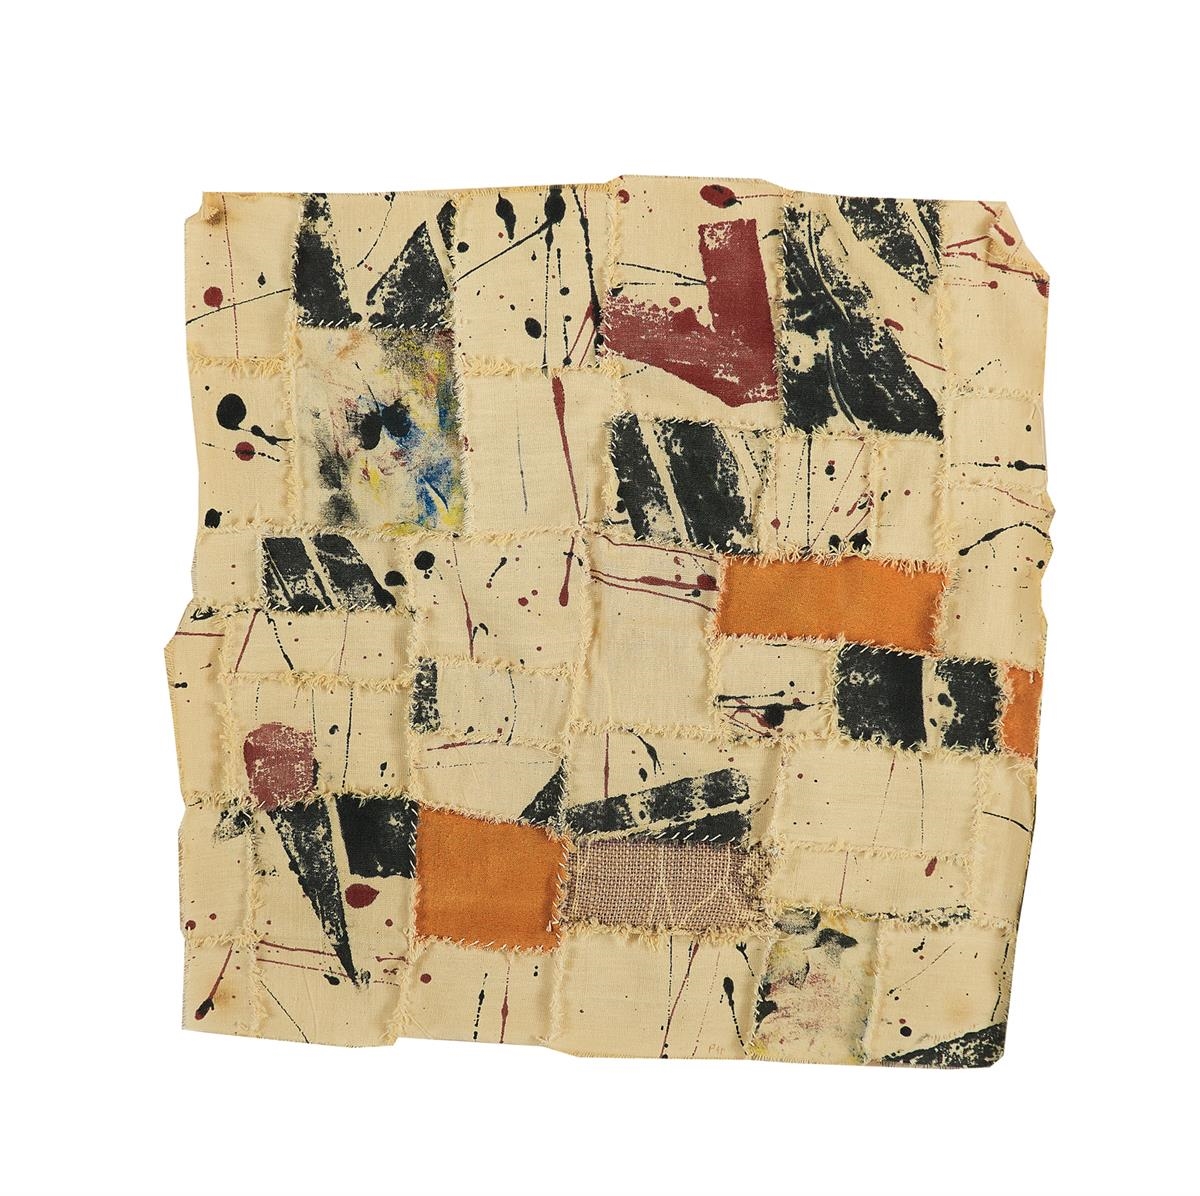 "Patchwork No. 40" by Marcel Alocco, 1975